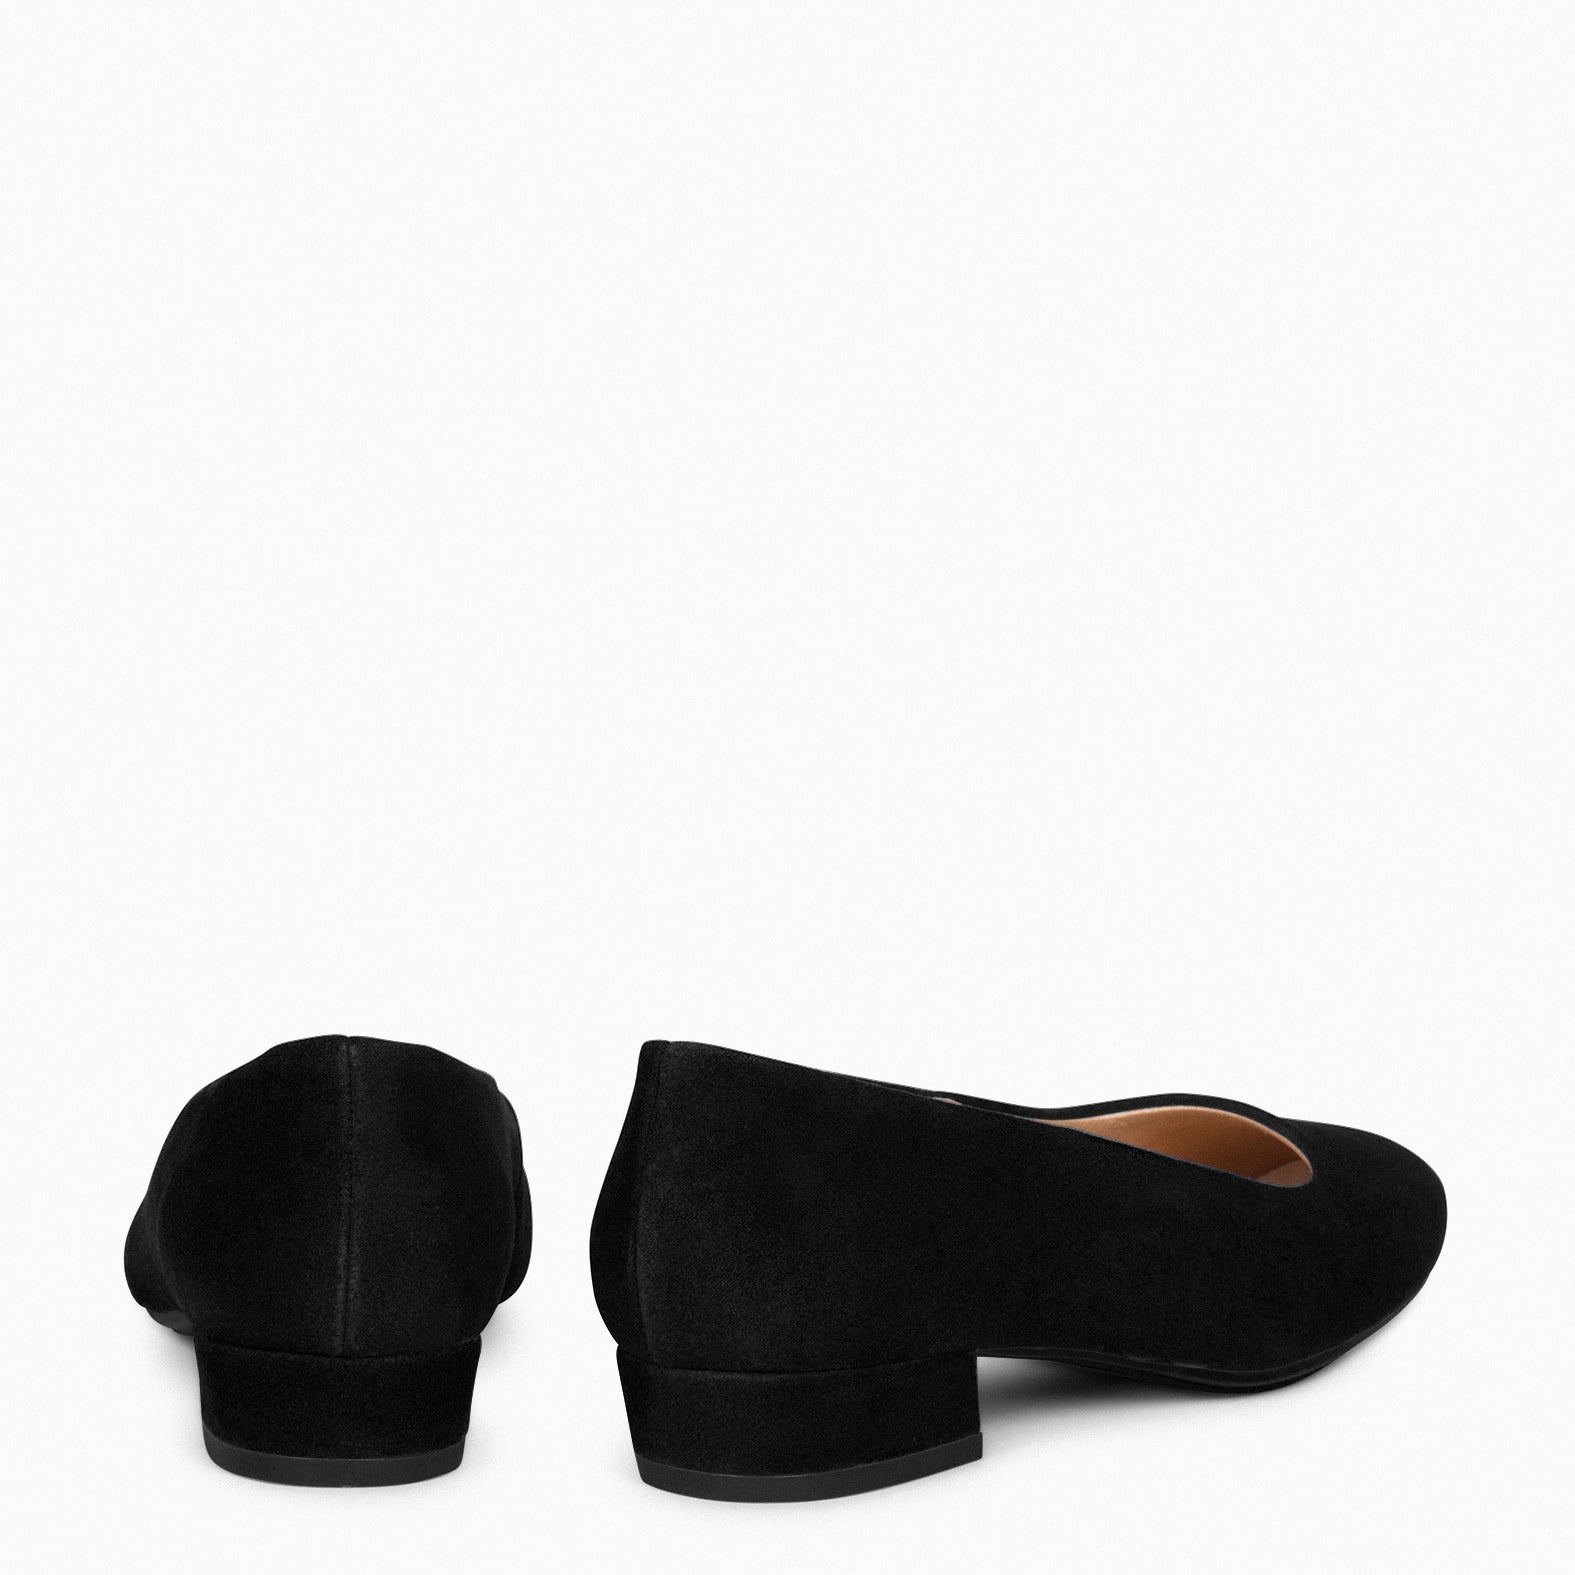 URBAN XS –  BLACK  low-heeled suede shoes